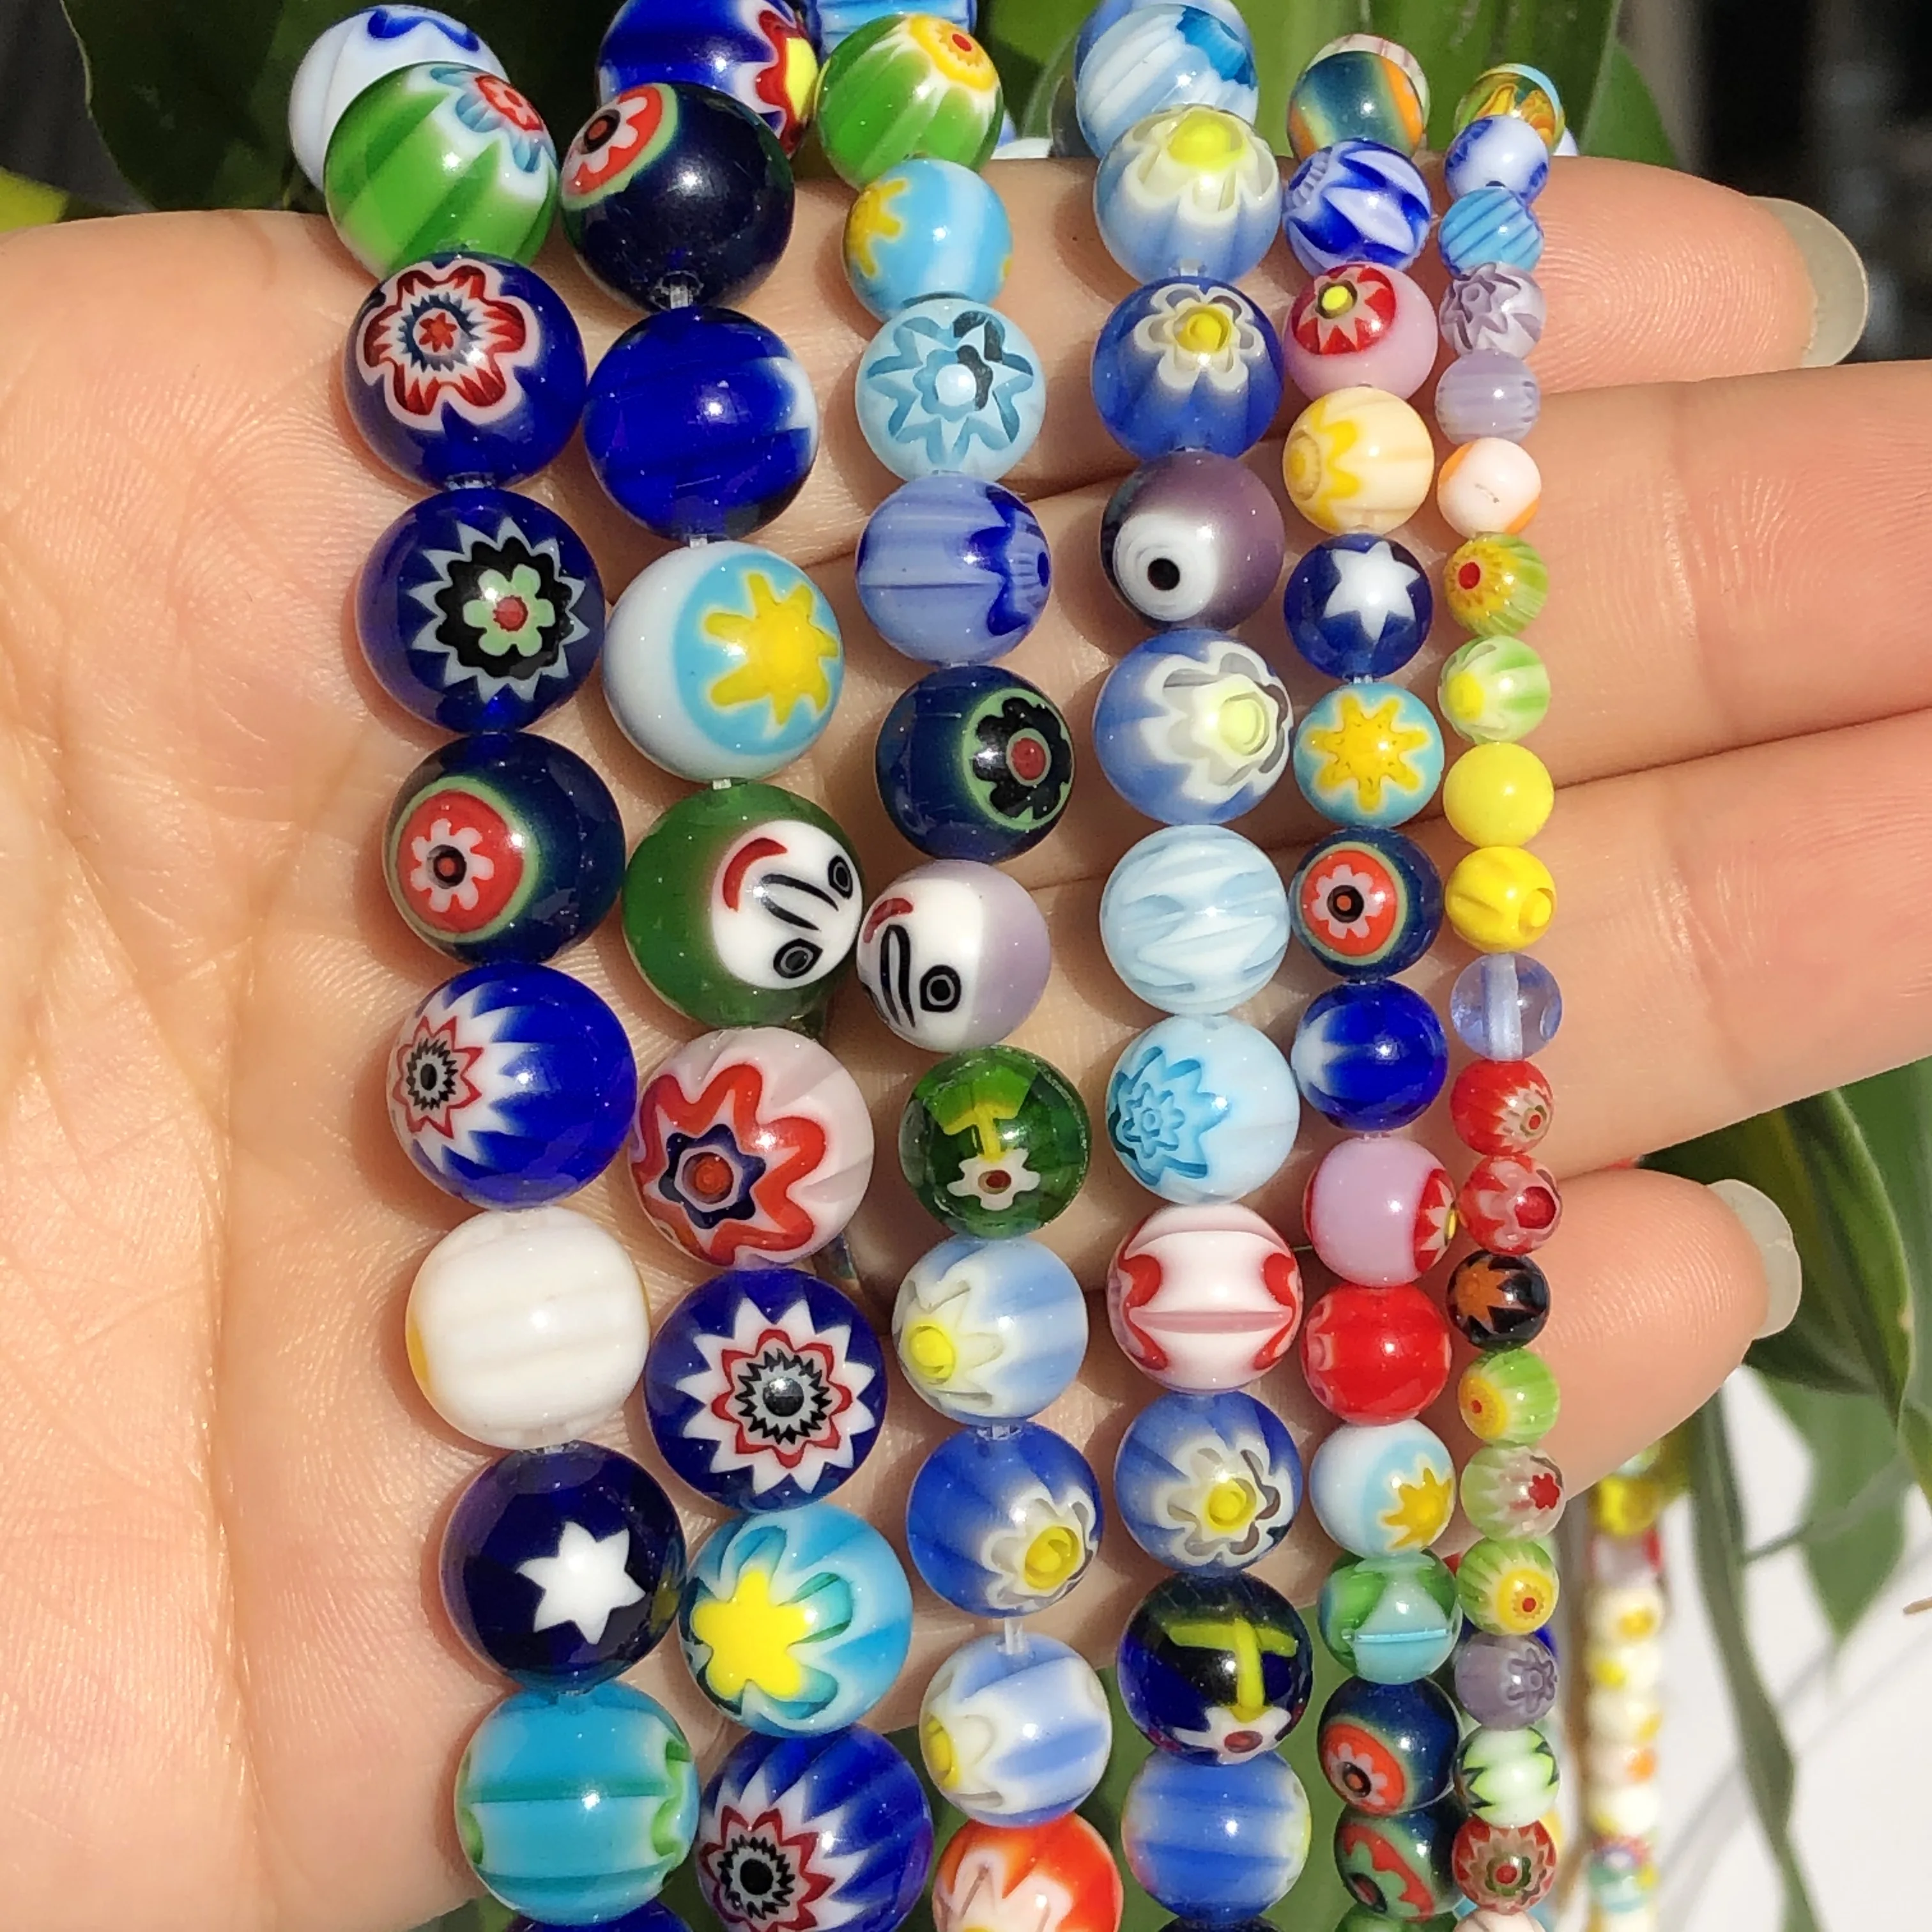 

4 6 8 10mm Murano Lampwork Flower Beads For Jewelry Making Diy Bracelet Necklace Crafts Accessories Multicolor Round Glass Beads